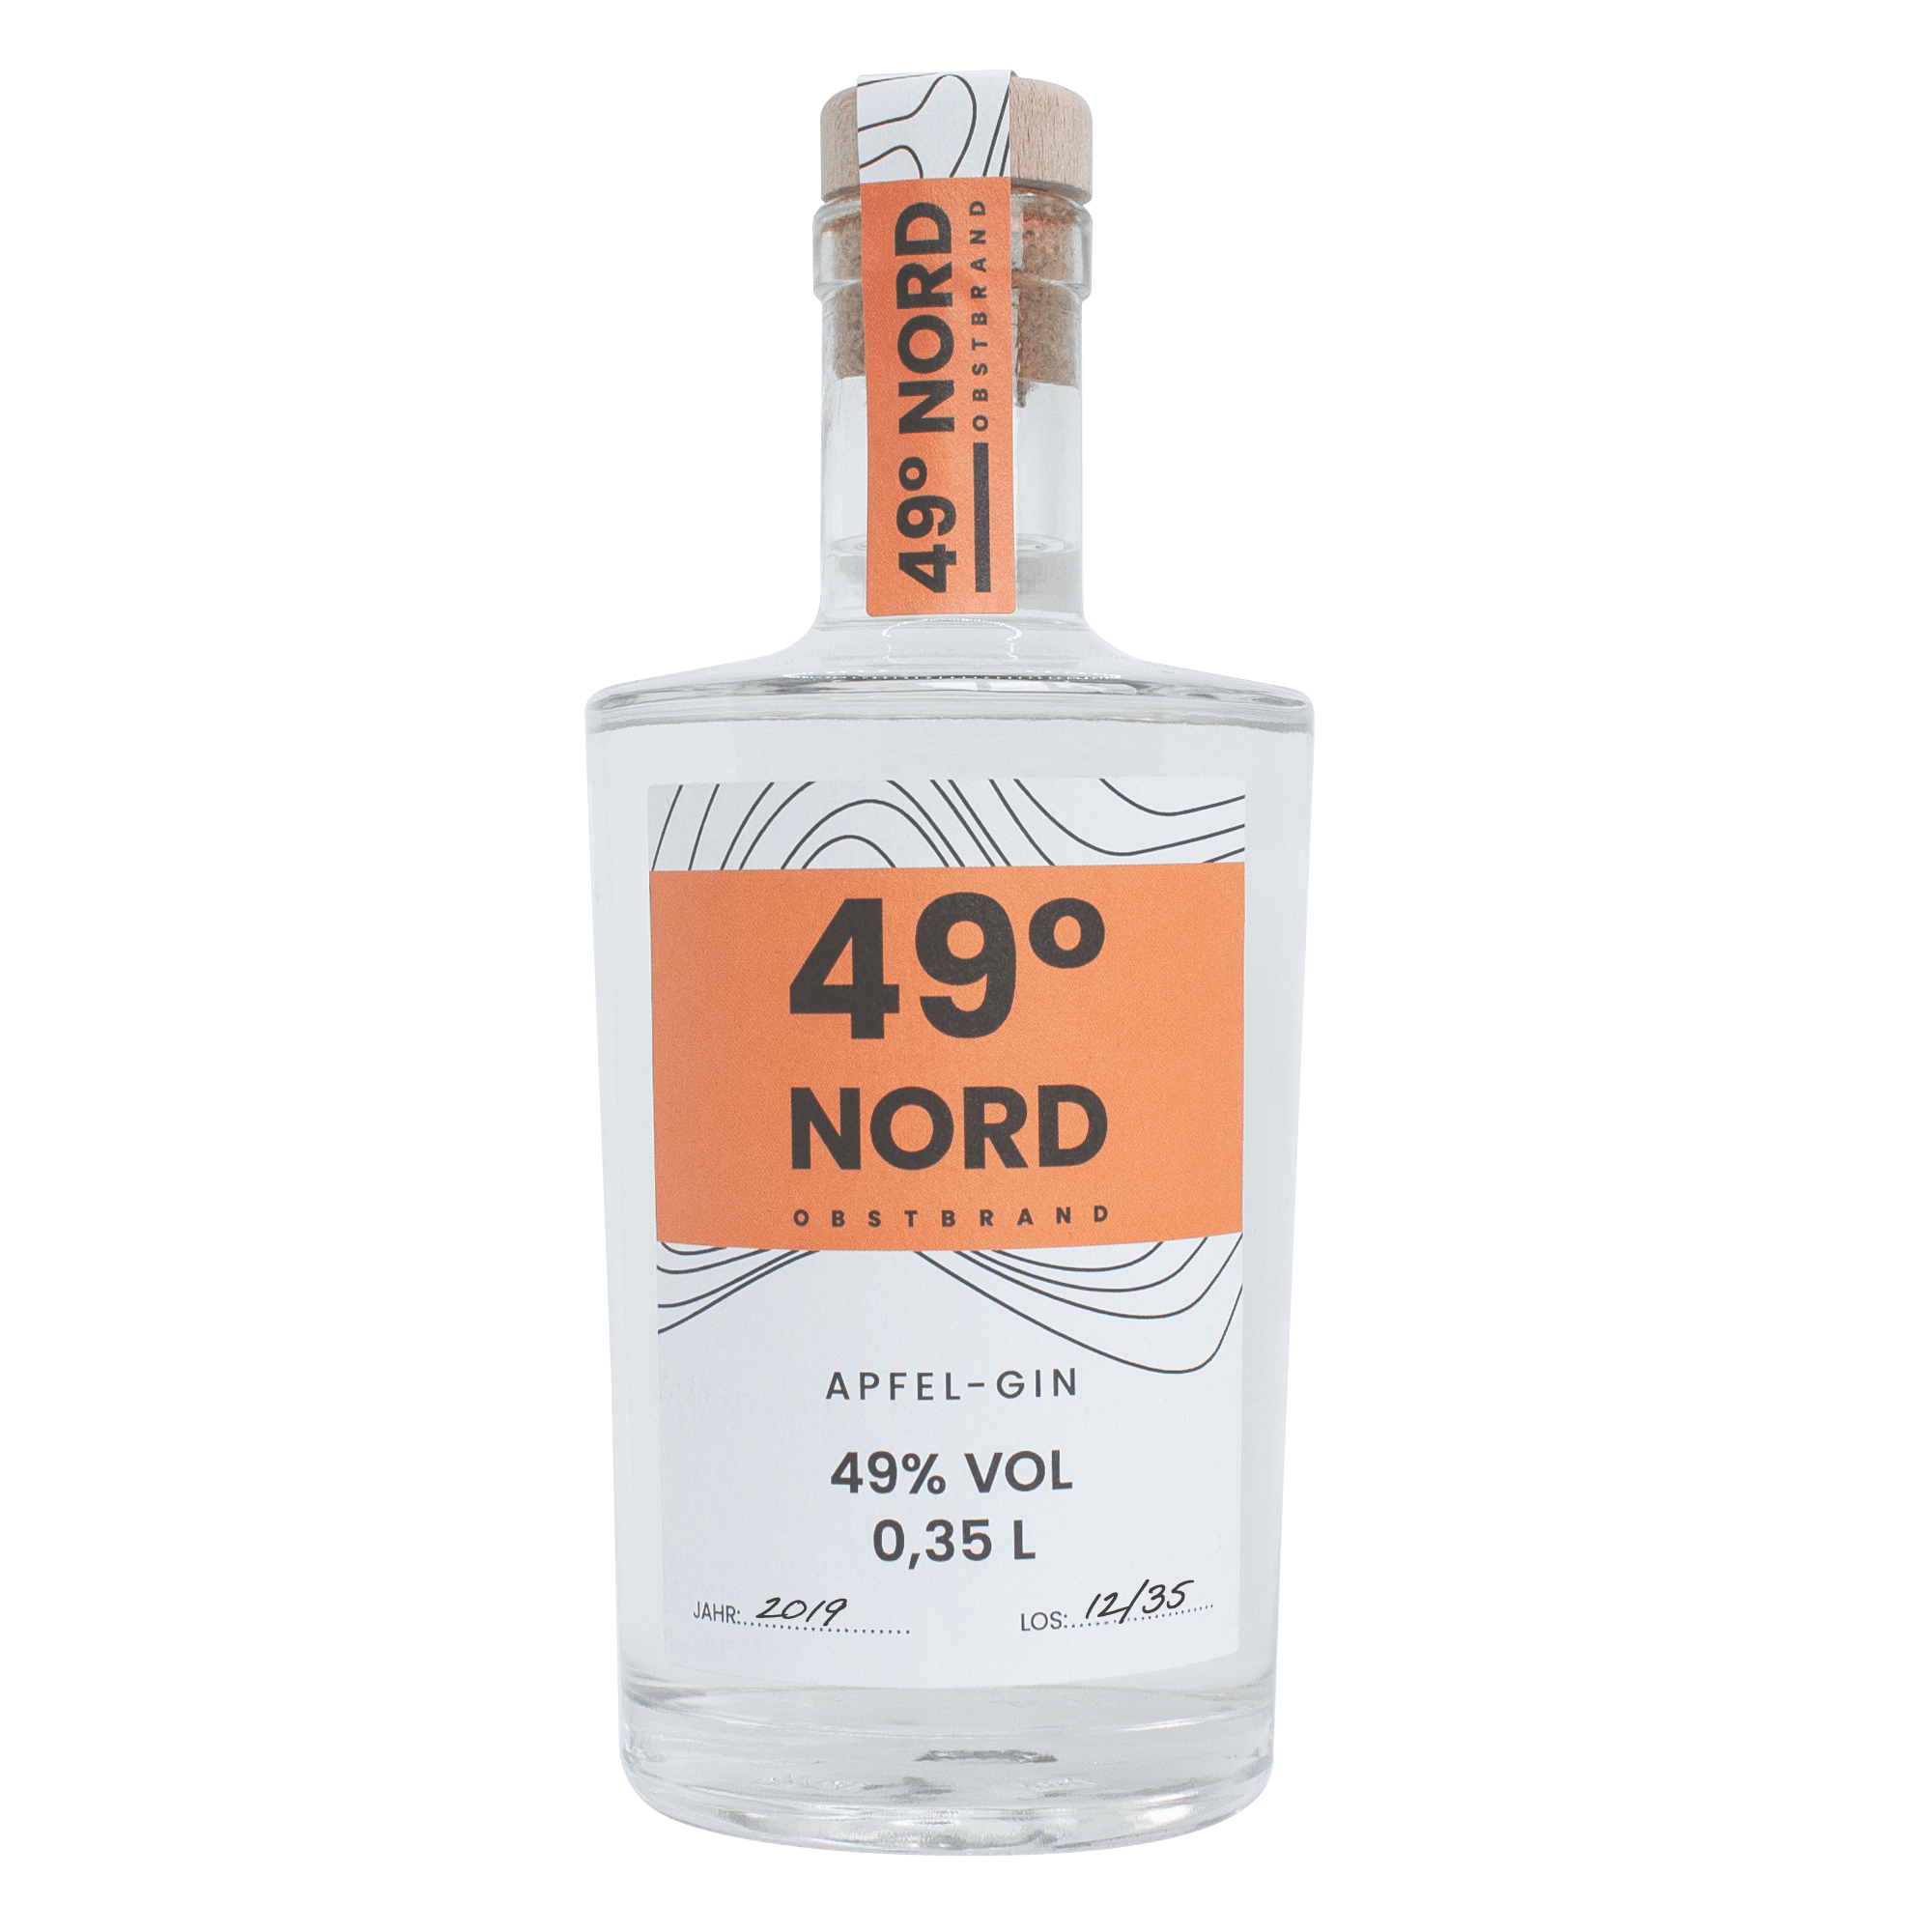 49° Nord Obstbrand Apfel-Gin – 49° Nord | Gin